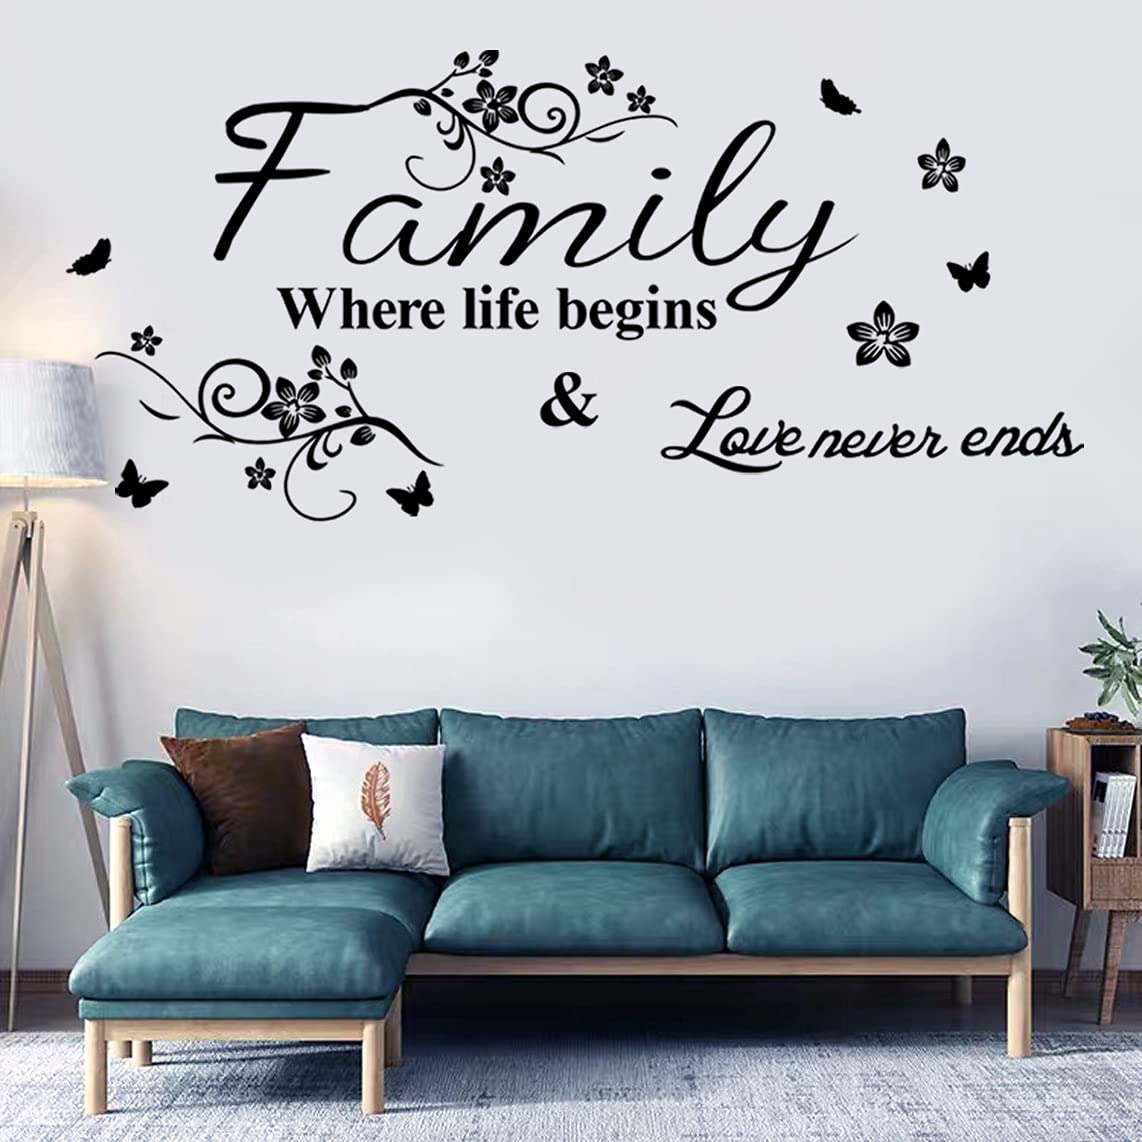 35 Best Family Wall Quotes